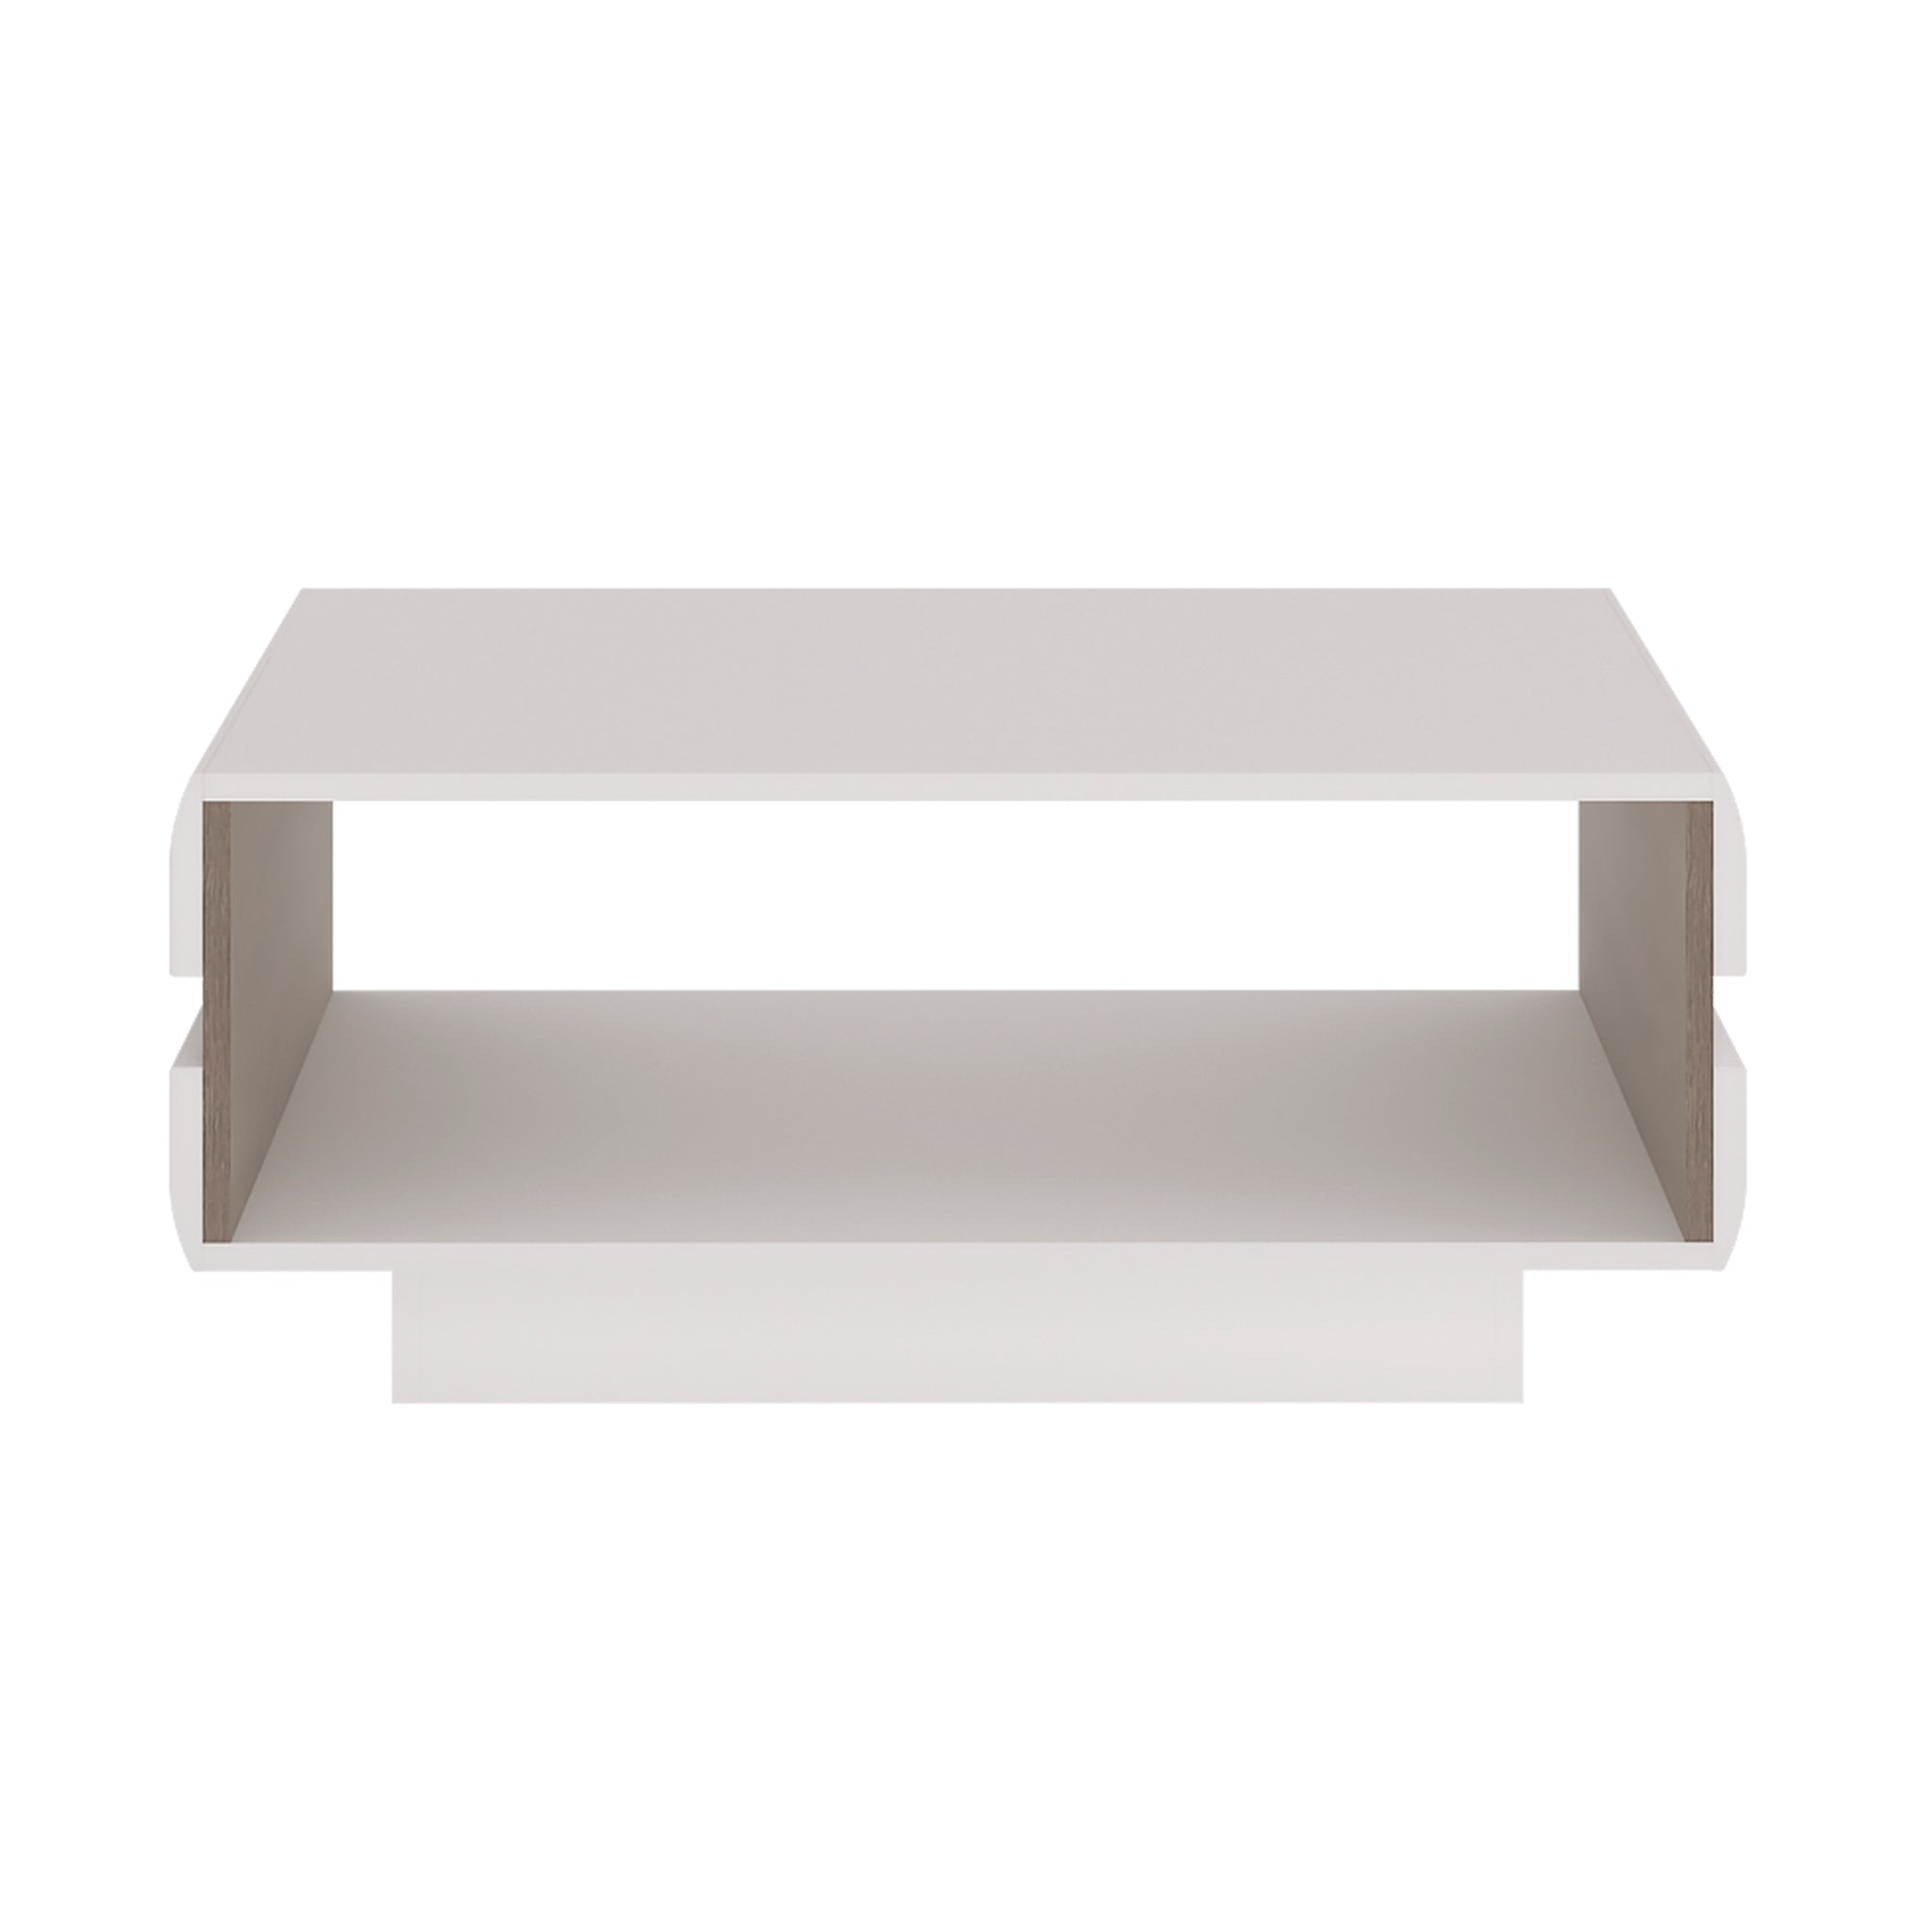 Notting hill Large Designer Coffee Table in White with Oak Trim